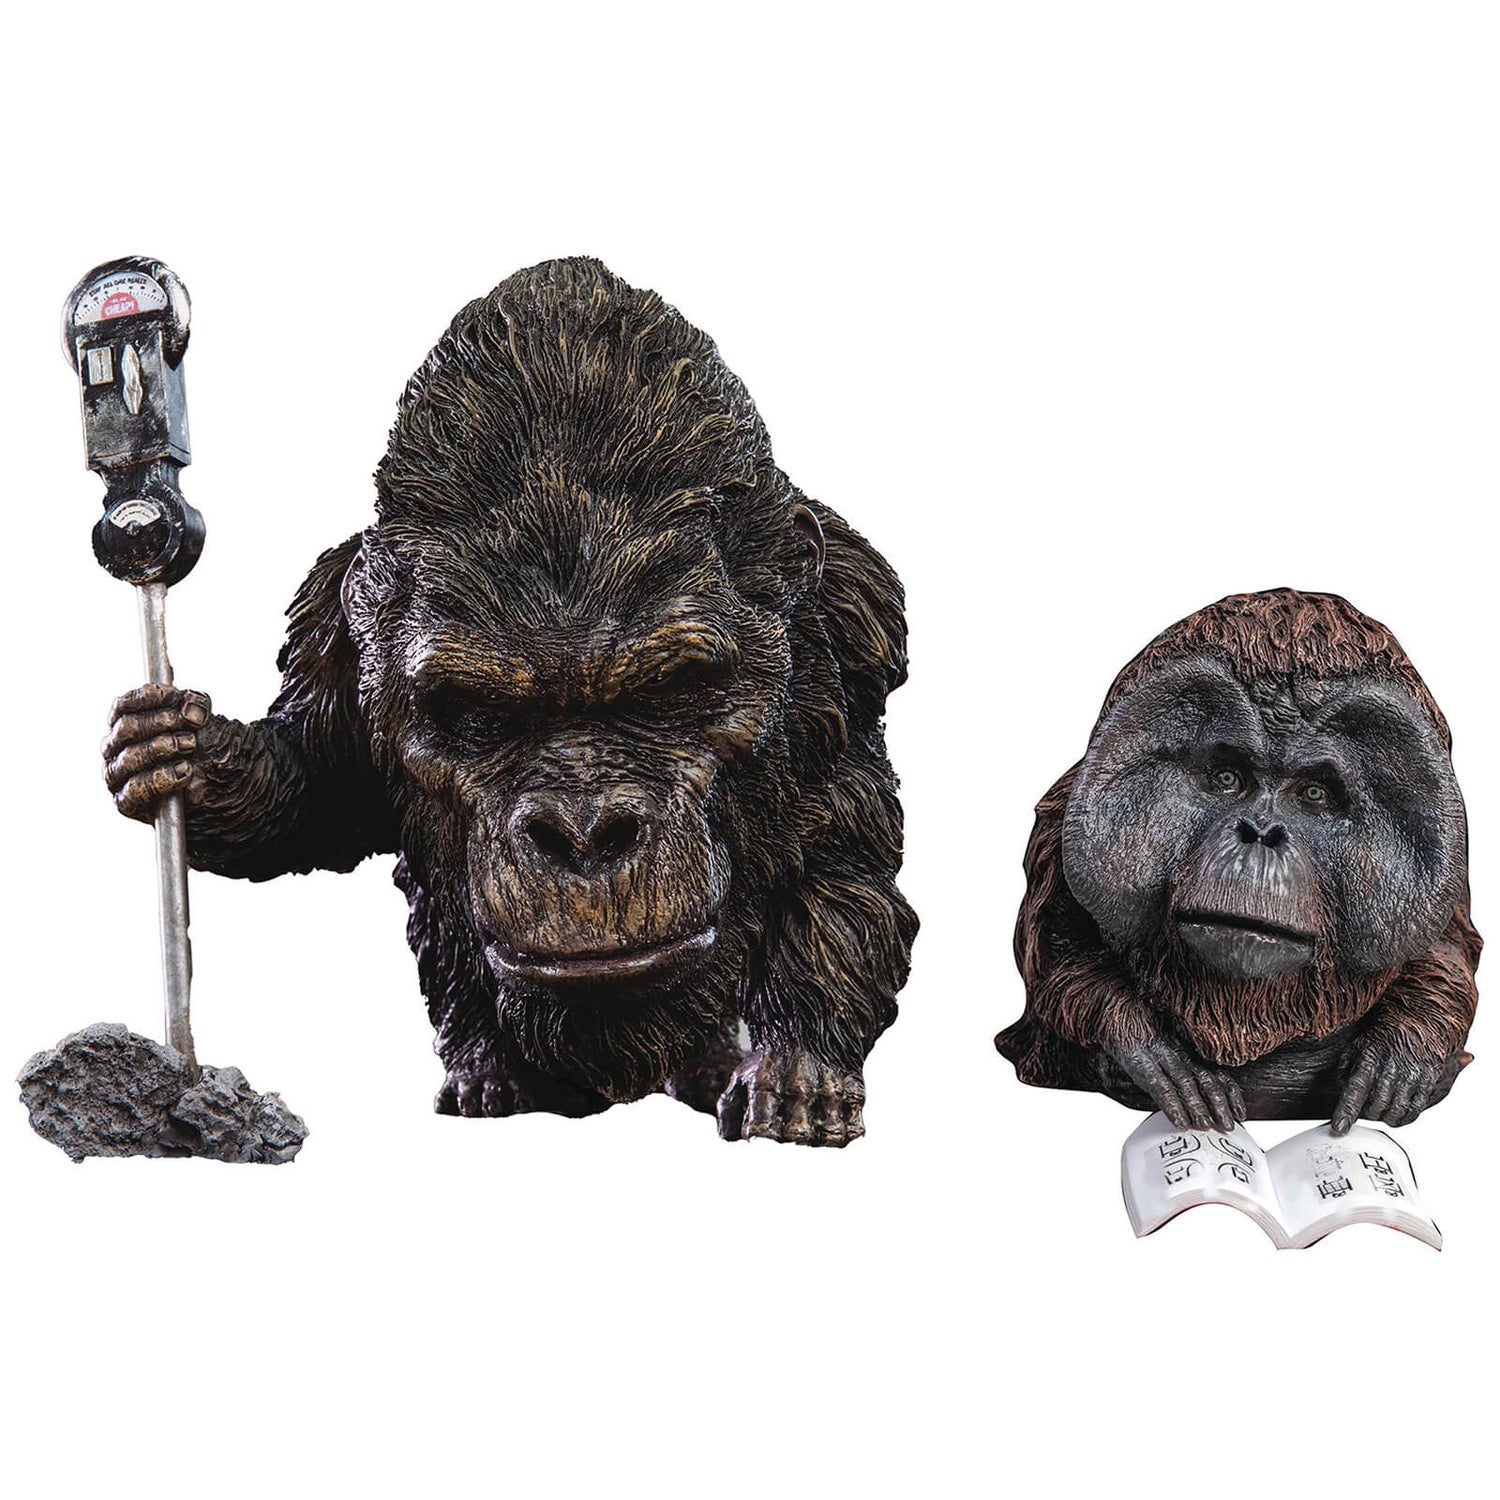 X-Plus DefoReal Series Rise of the Planet of the Apes Soft Vinyl Figure 2-Pack - Buck & Maurice